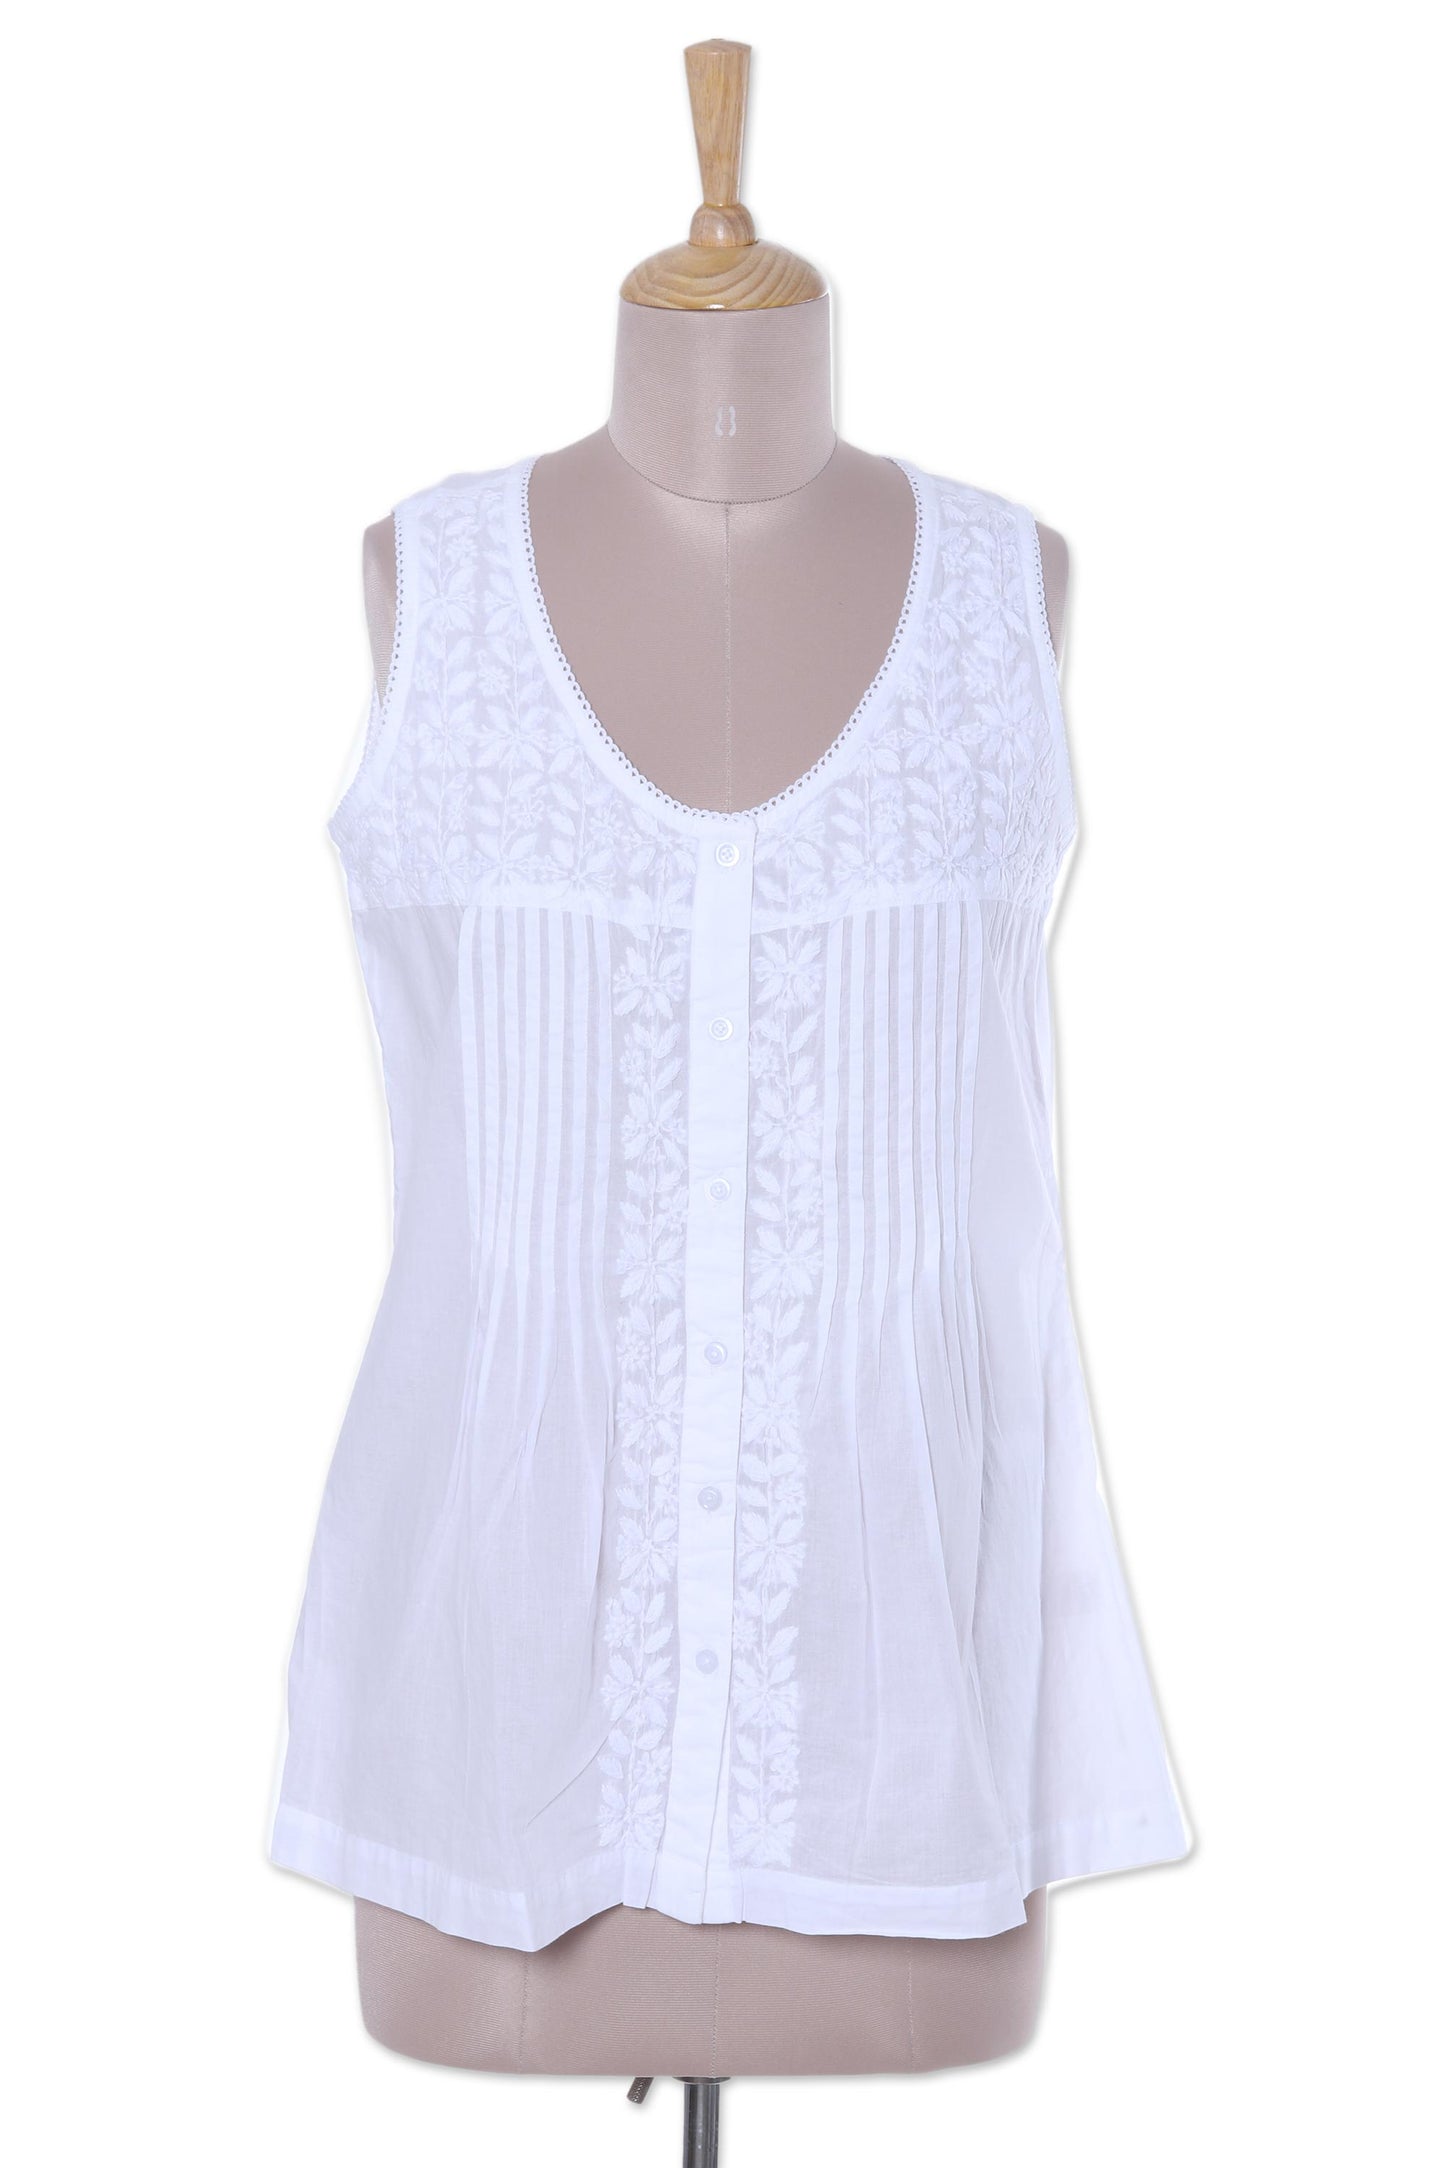 Floral Flirt Sleeveless Floral White Blouse Hand Embroidered in India